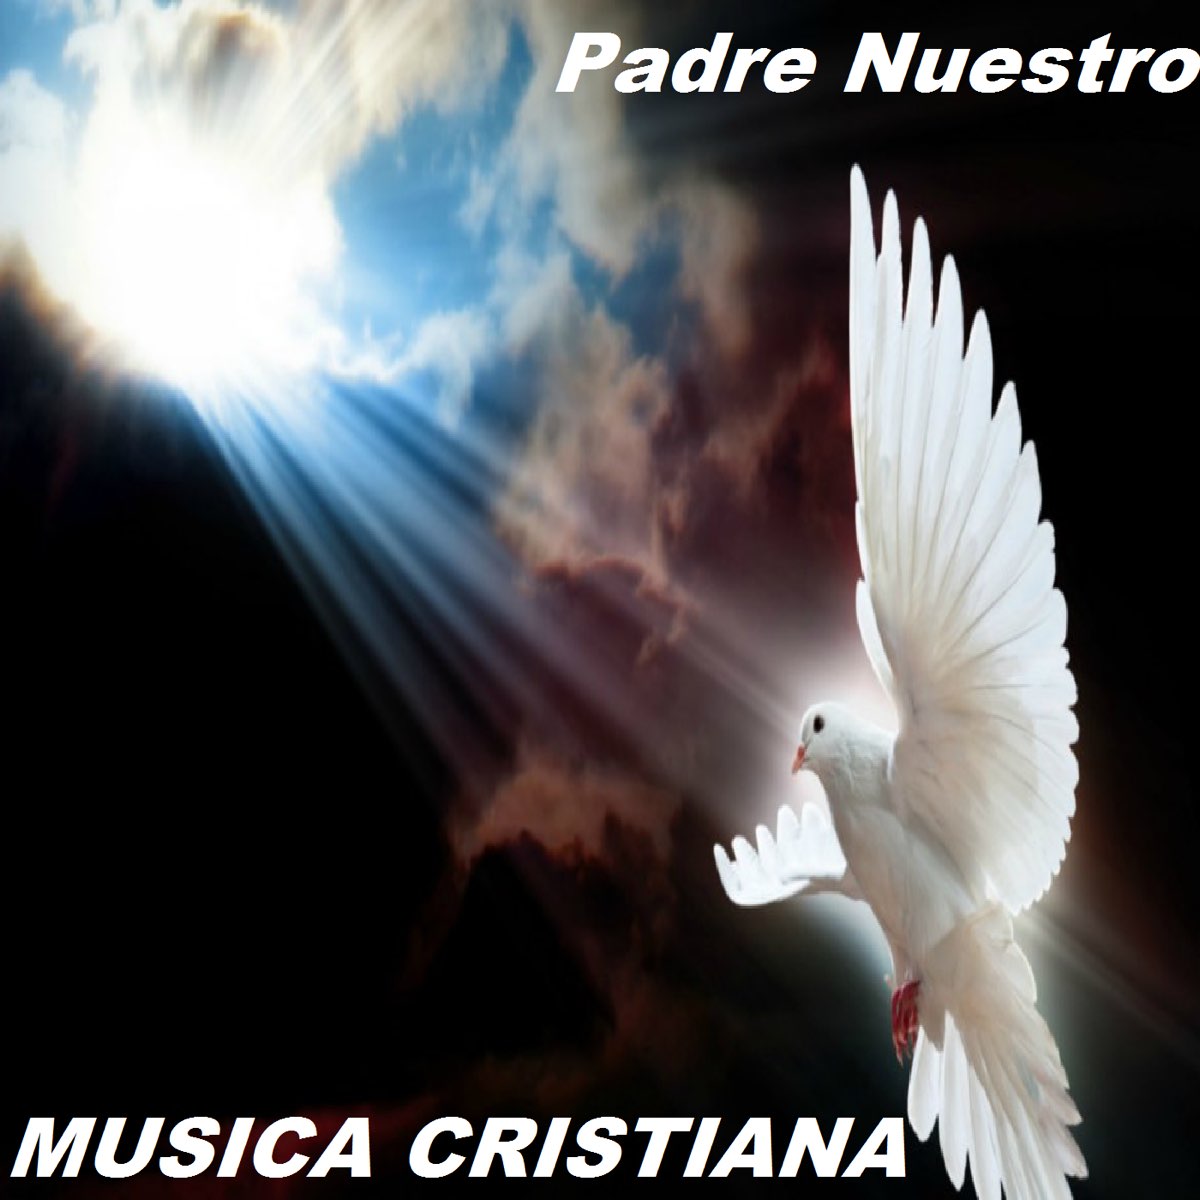 Padre Nuestro by Musica Cristiana on Apple Music